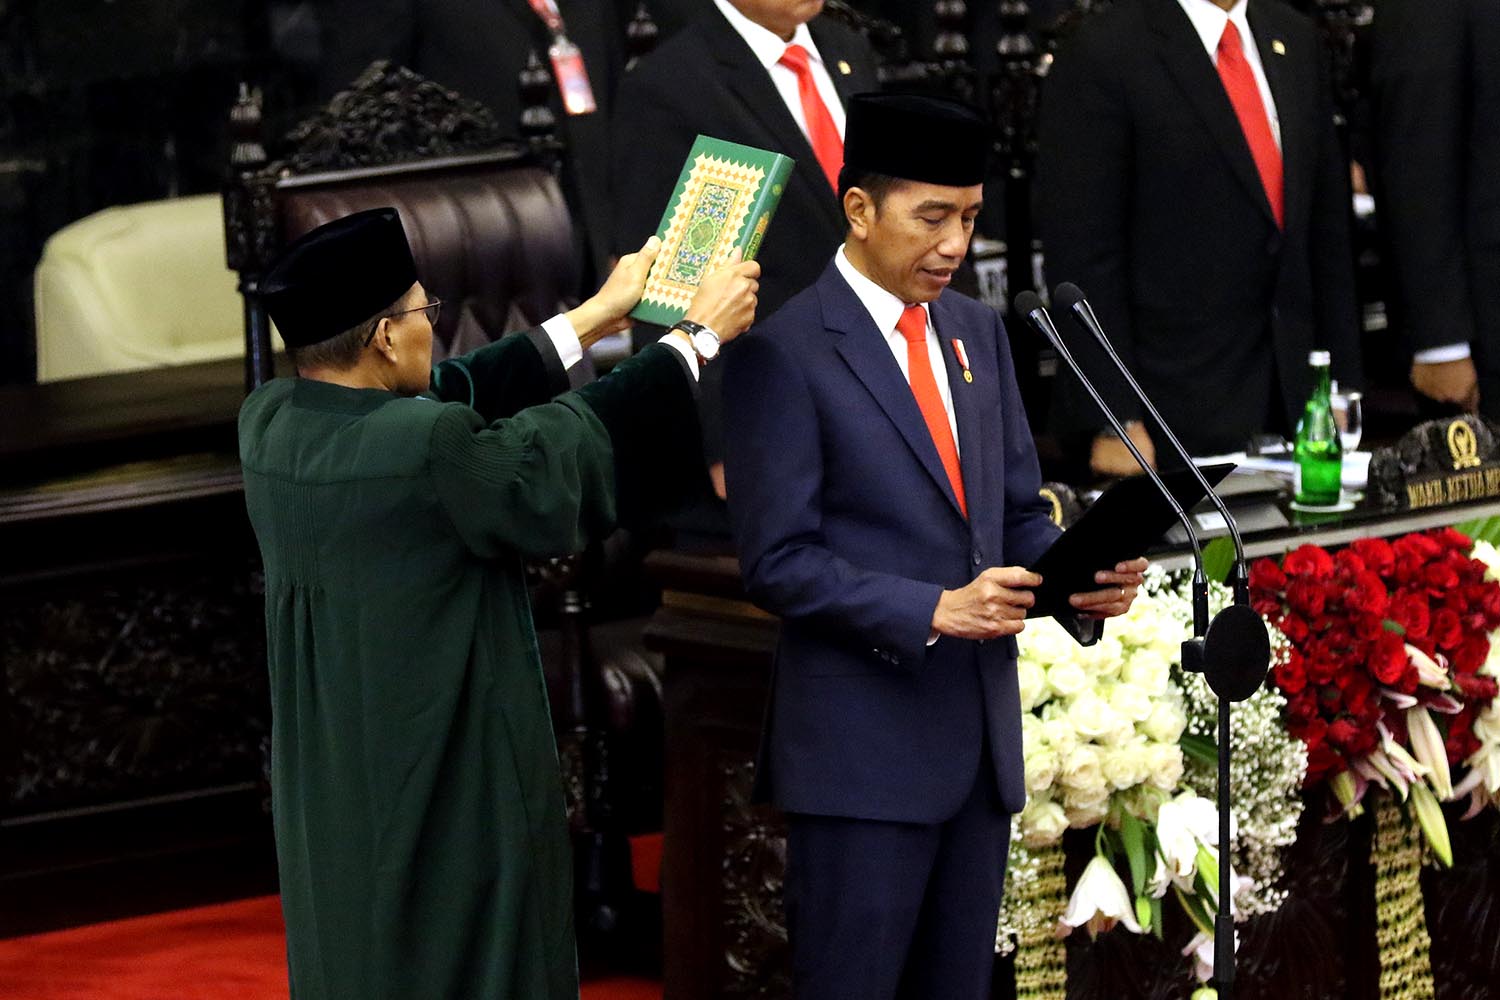 Joko "Jokowi" Widodo and Ma'ruf Amin have officially taken their oath as Indonesian President and Vice President for the 2019-2024 term. Jokowi took the oath for his second term as Indonesian President in a plenary session of the People's Consultative Assembly, led by Assembly speaker Bambang Soesatyo on Sunday afternoon. JP/Dhoni Setiawan